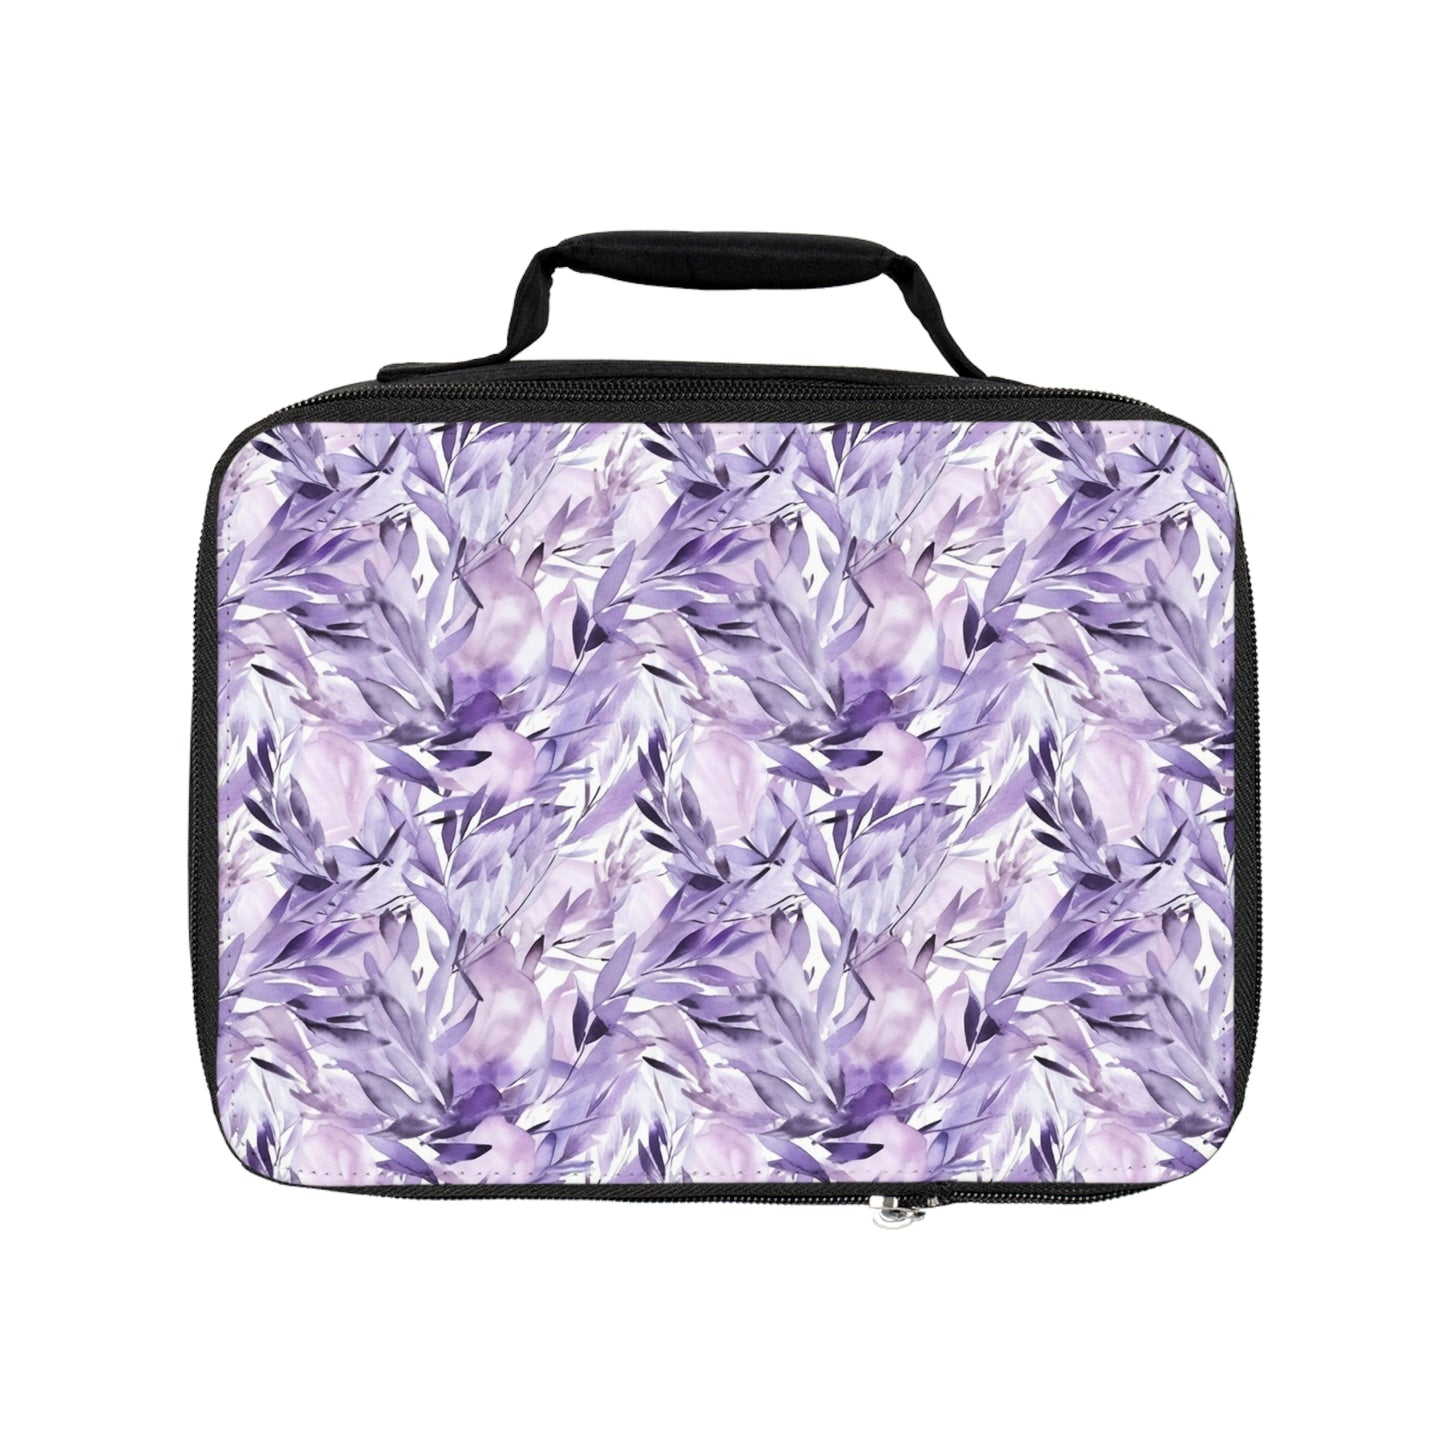 Lavender Insulated Lunch Box, Purple Floral Flowers Cute Food Container Adult Kids Women Teens Men Black School Work Starcove Fashion